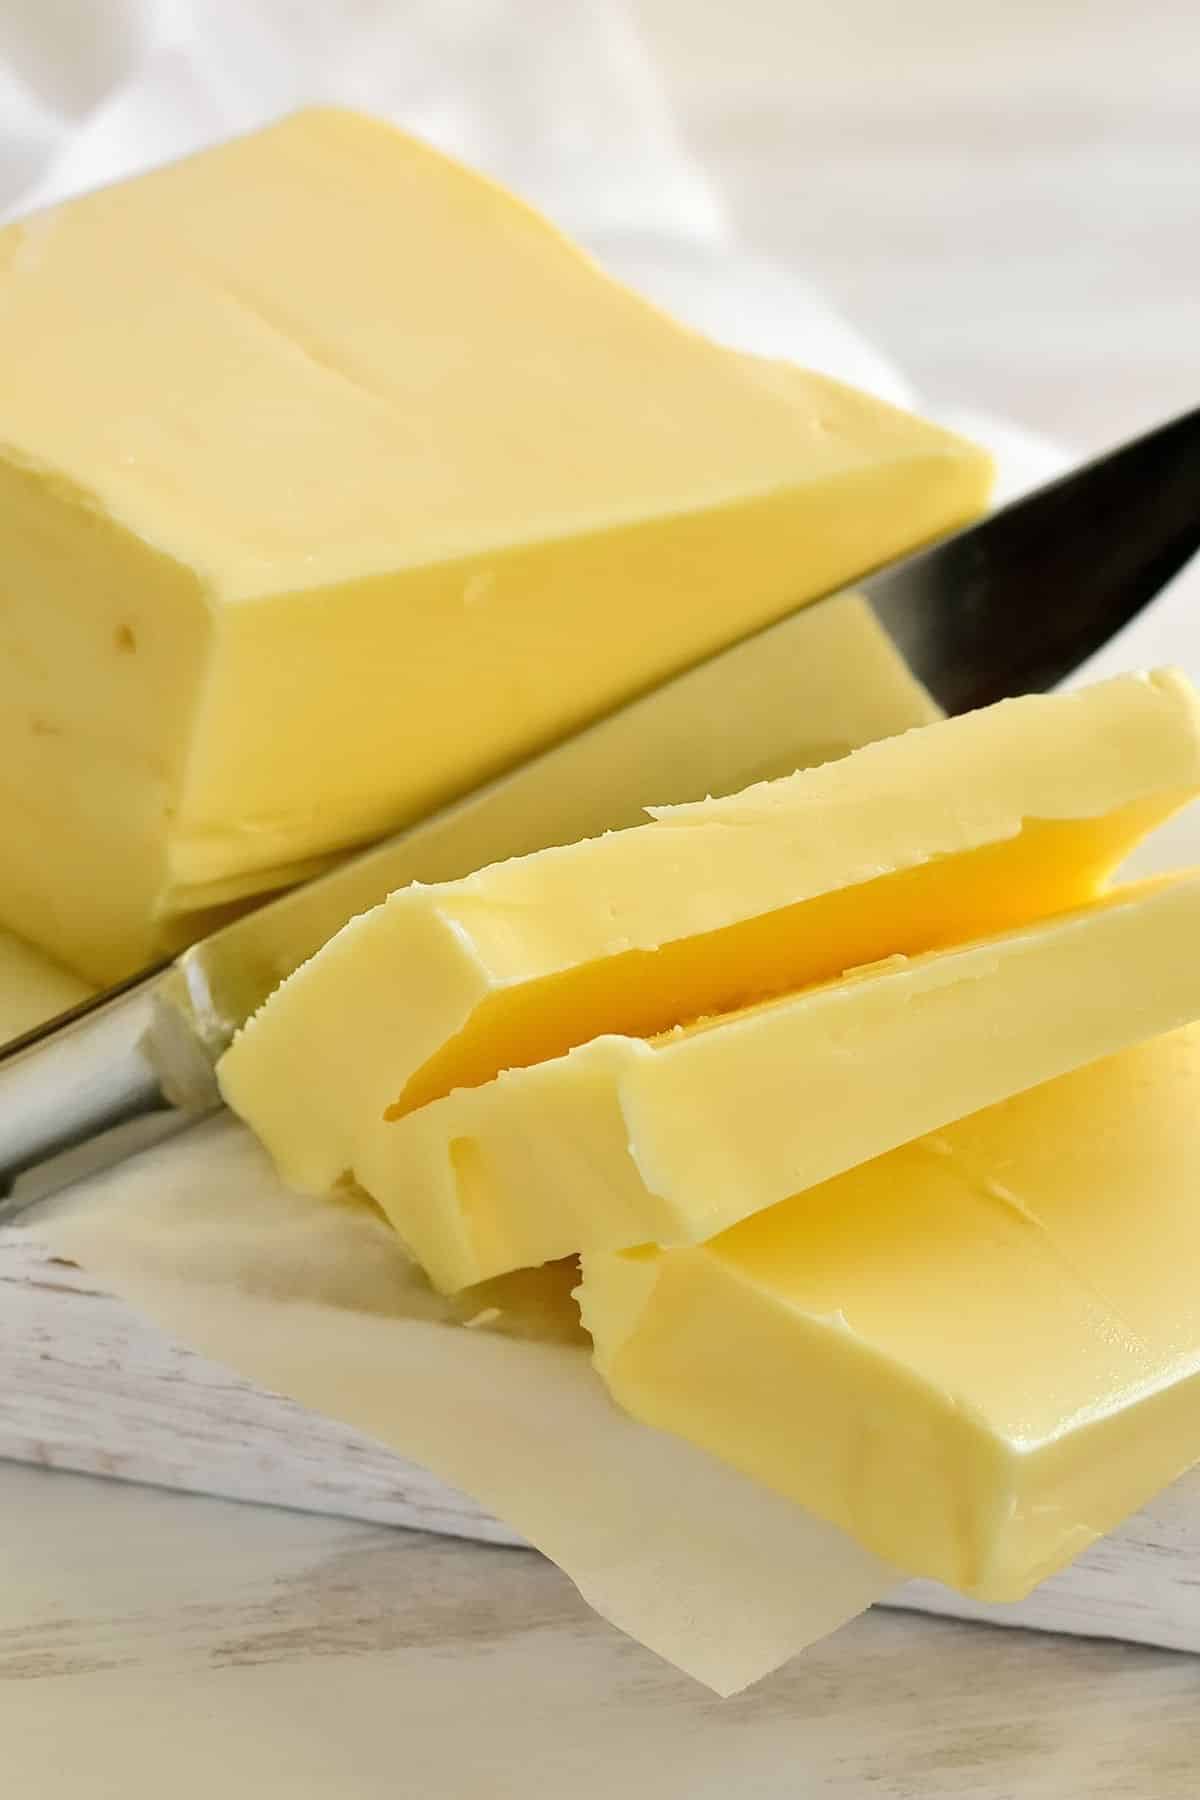 Stick of butter being sliced by a knife on a cutting board.